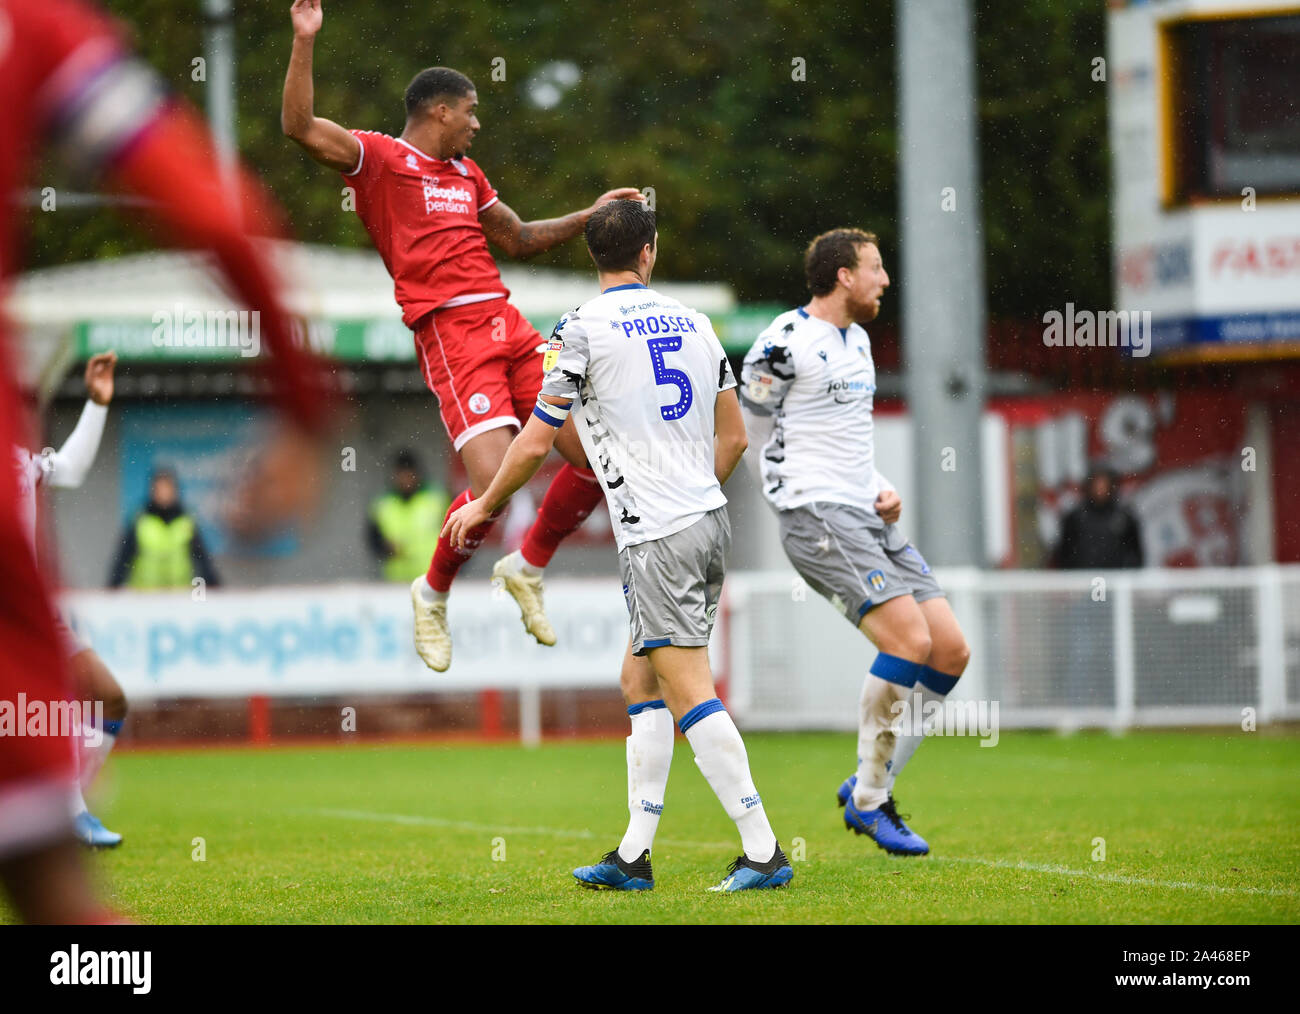 Crawley UK 12 October 2019 - Mason Bloomfield of Crawley heads in their second goal  during the Skybet League Two match between Crawley Town and Colchester United at the People's Pension Stadium . Credit : Simon Dack TPI / Alamy Live News Stock Photo